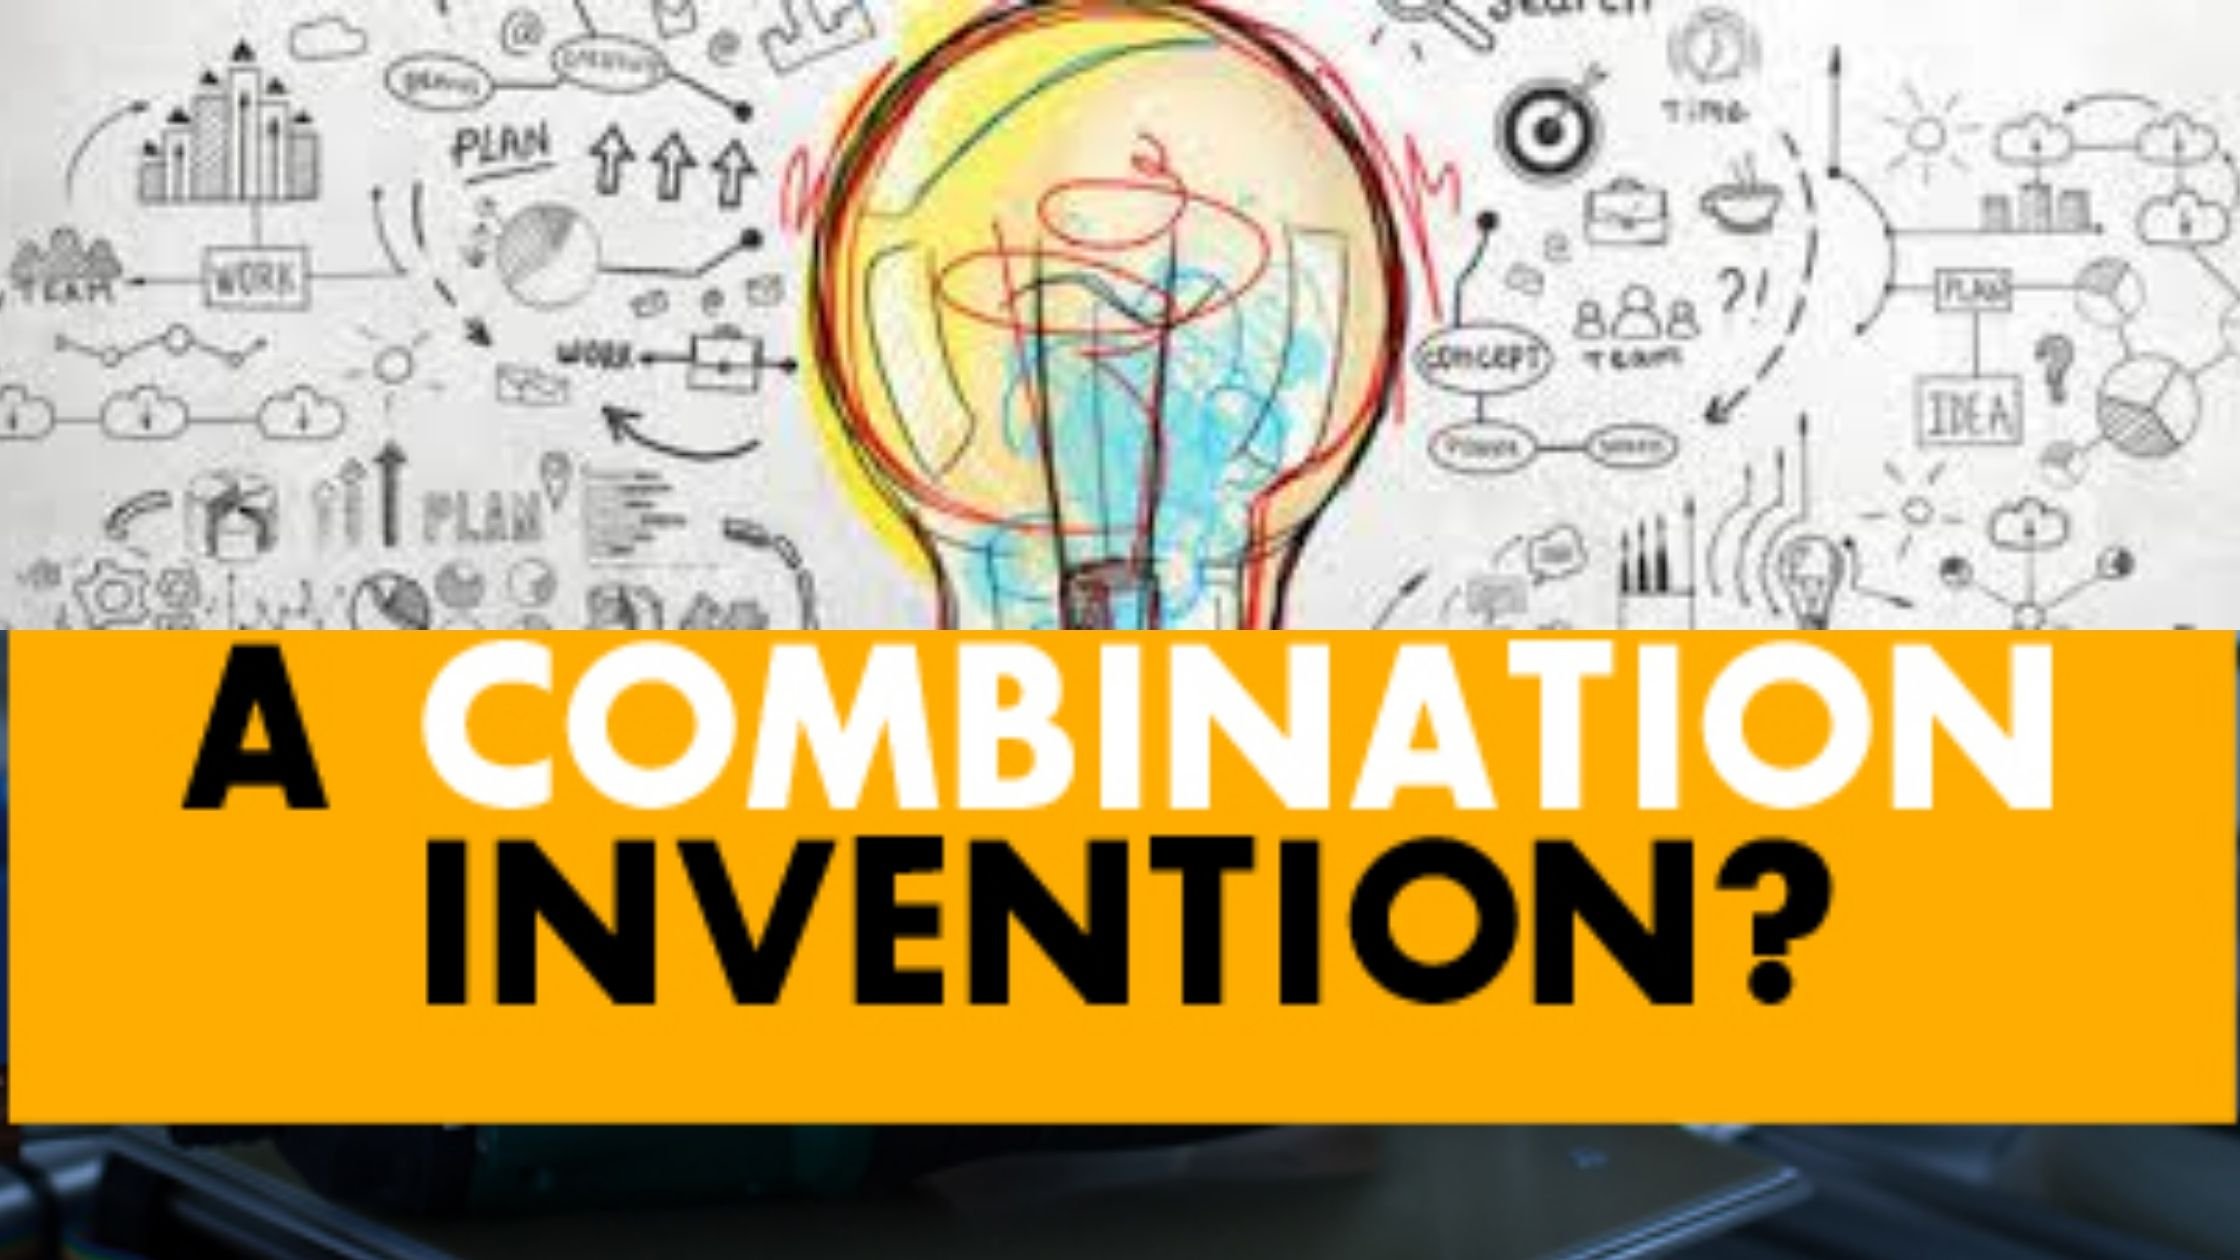 What are Combination Inventions?